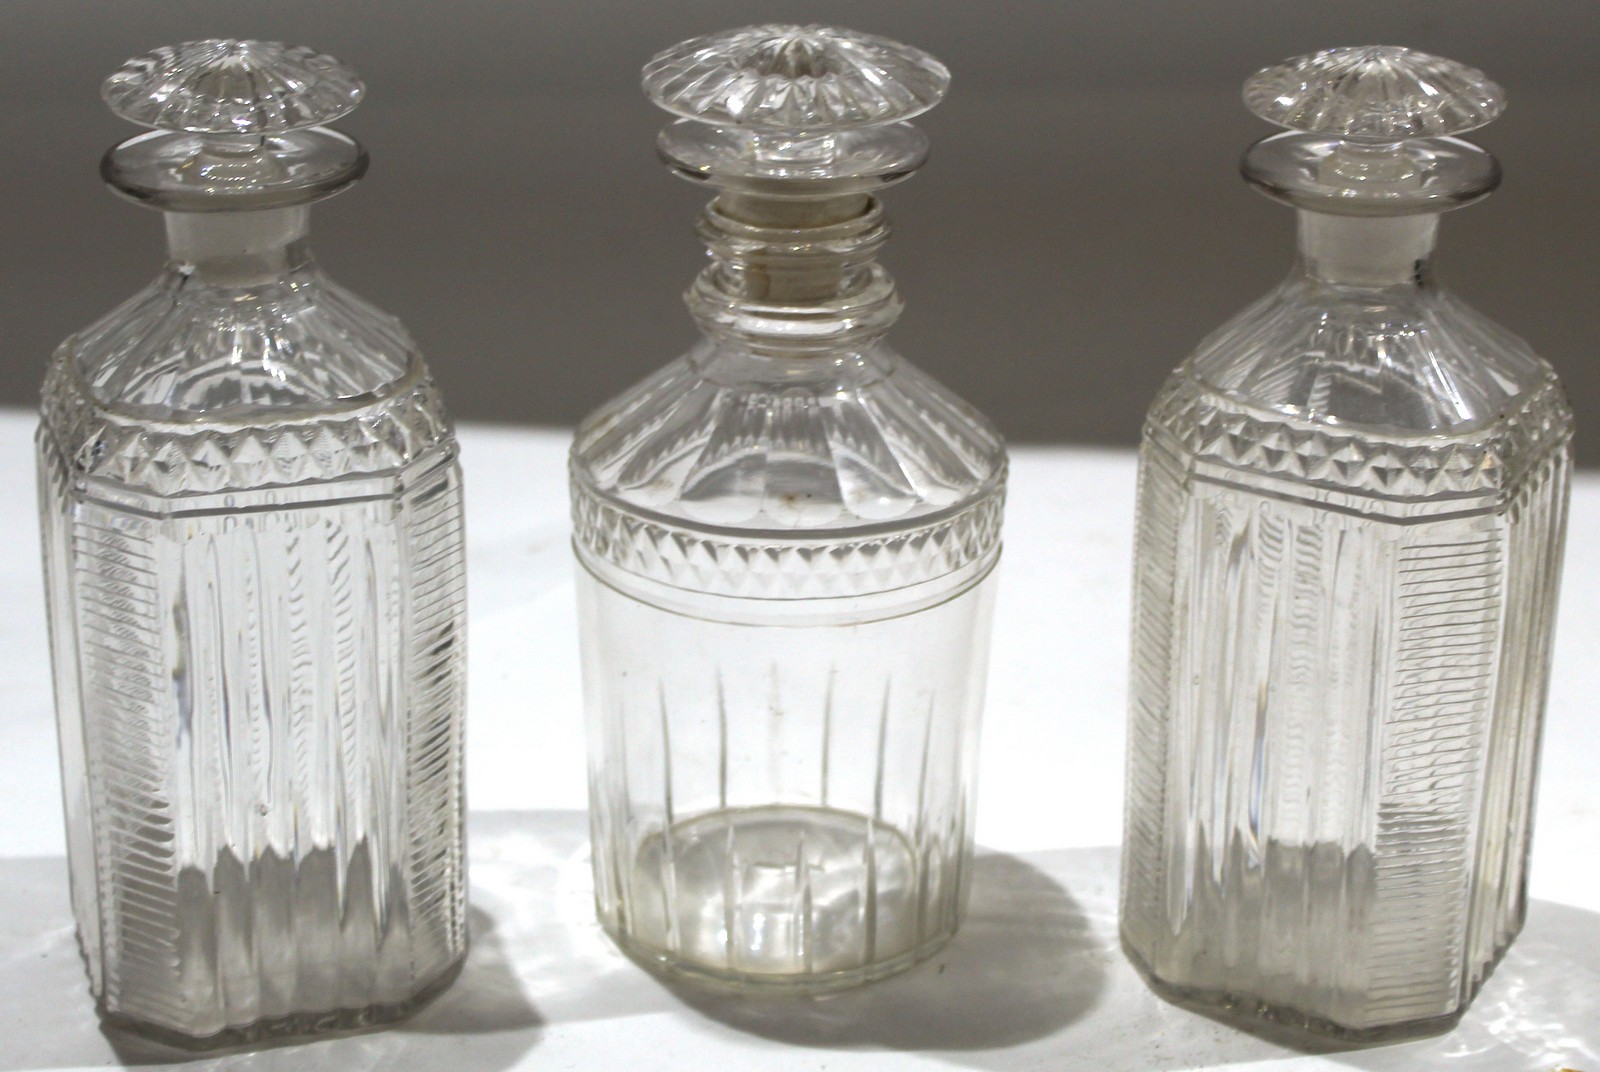 Group of late 19th century glass decanters with pillar style decoration and mushroom knops^ (3)